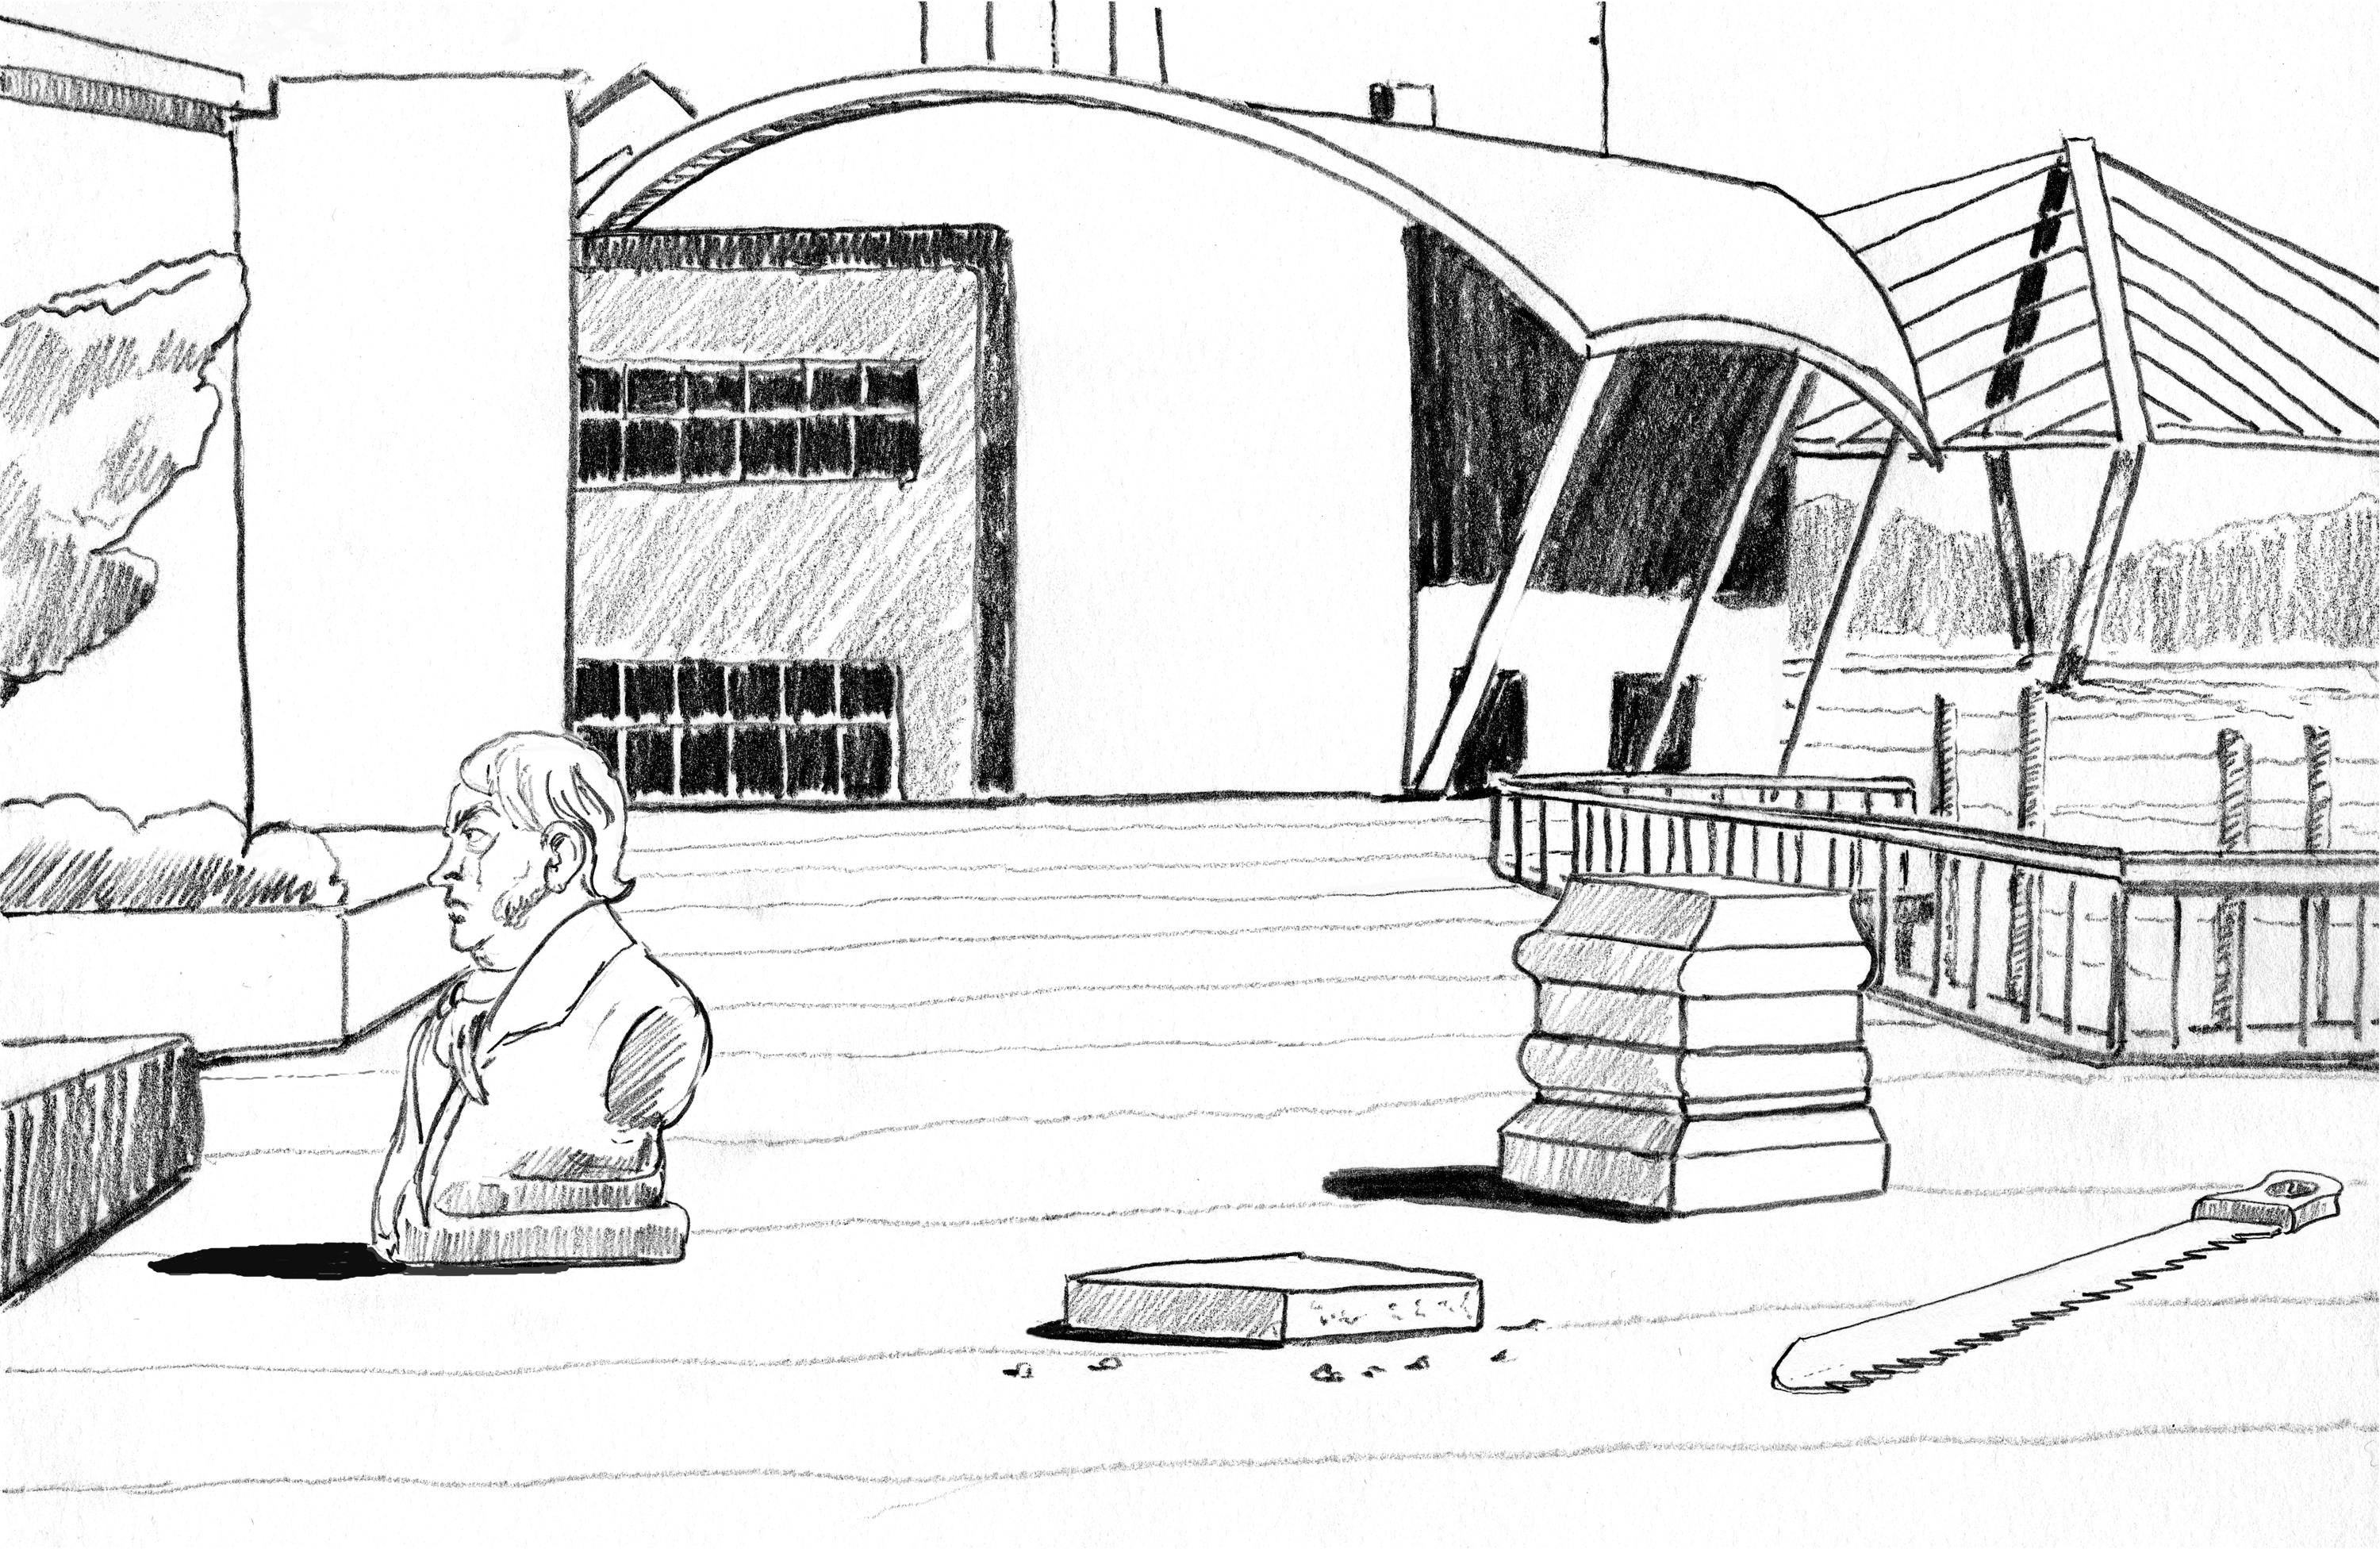 A black and white illustration of a Simon Fraser monument on a wharf. The statue’s bust has been removed from its plinth and sits on the ground next to a rock slab and saw.